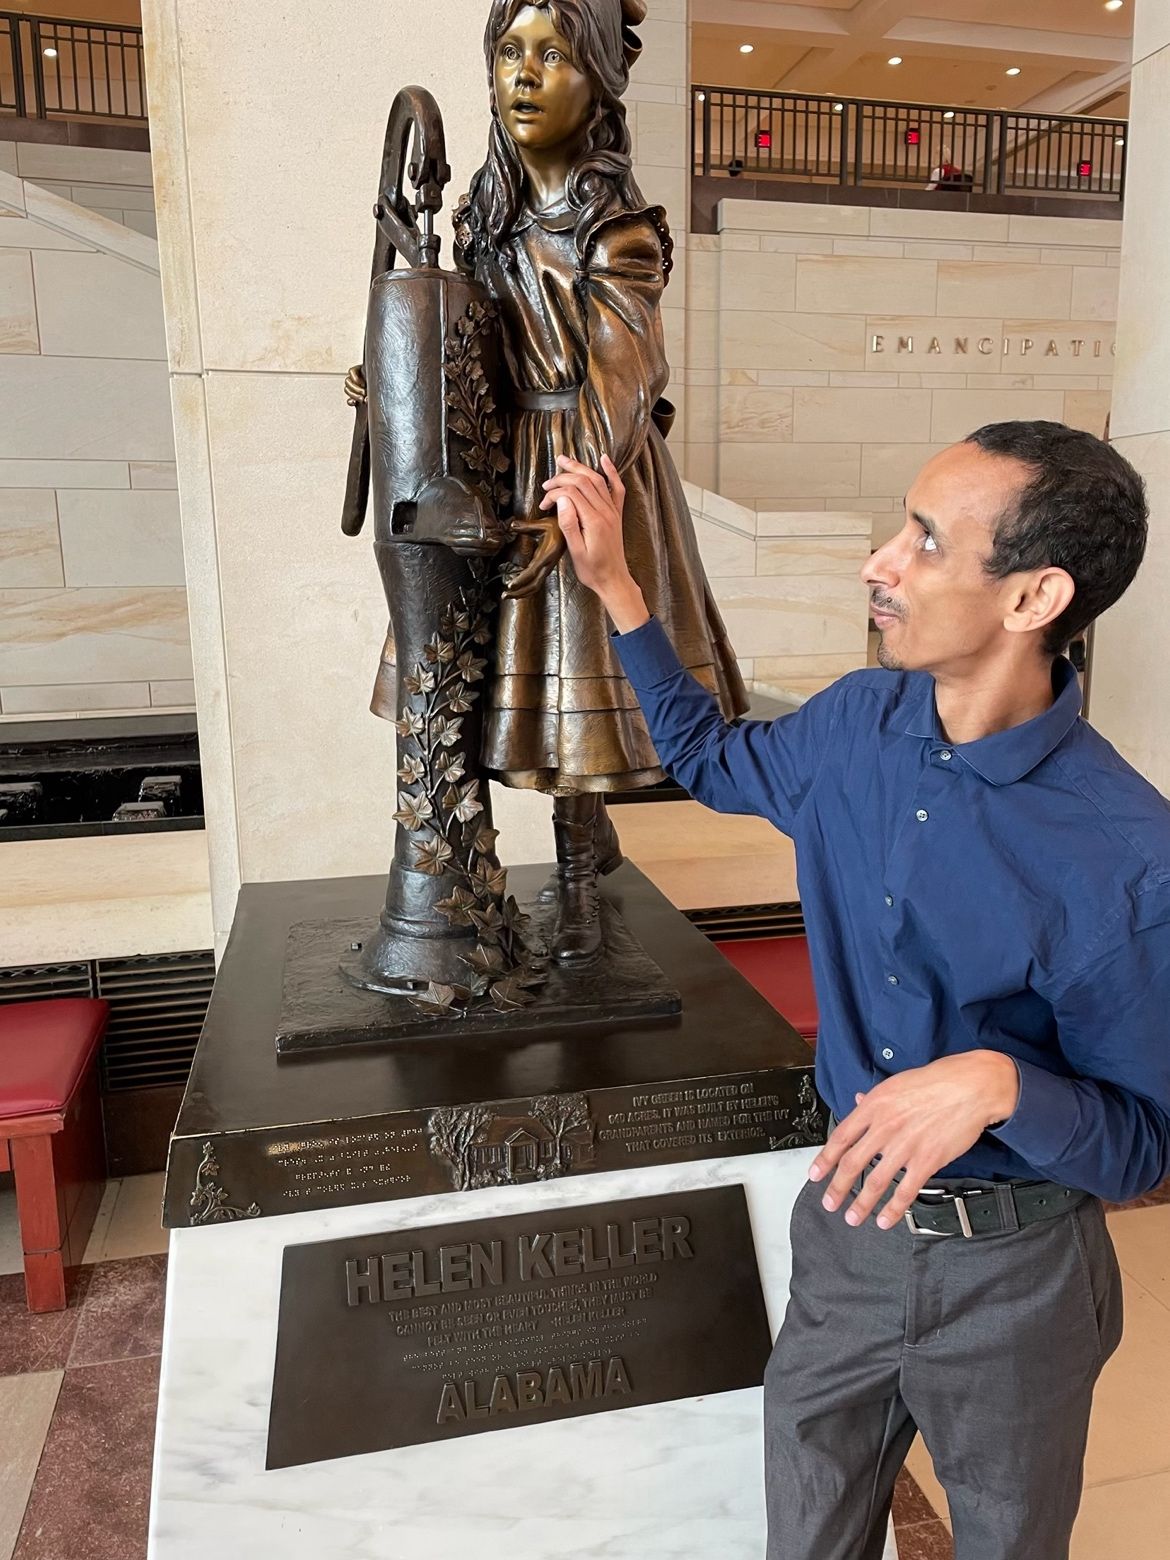 Mussie, a tall Eritrean American Deafblind man, stands beside the Helen Keller statue inside the U.S. Capitol. Young Helen has one hand on the handle of the water pump, and the other hand under the spout. Mussie studies Helen’s hand beneath the water spout.